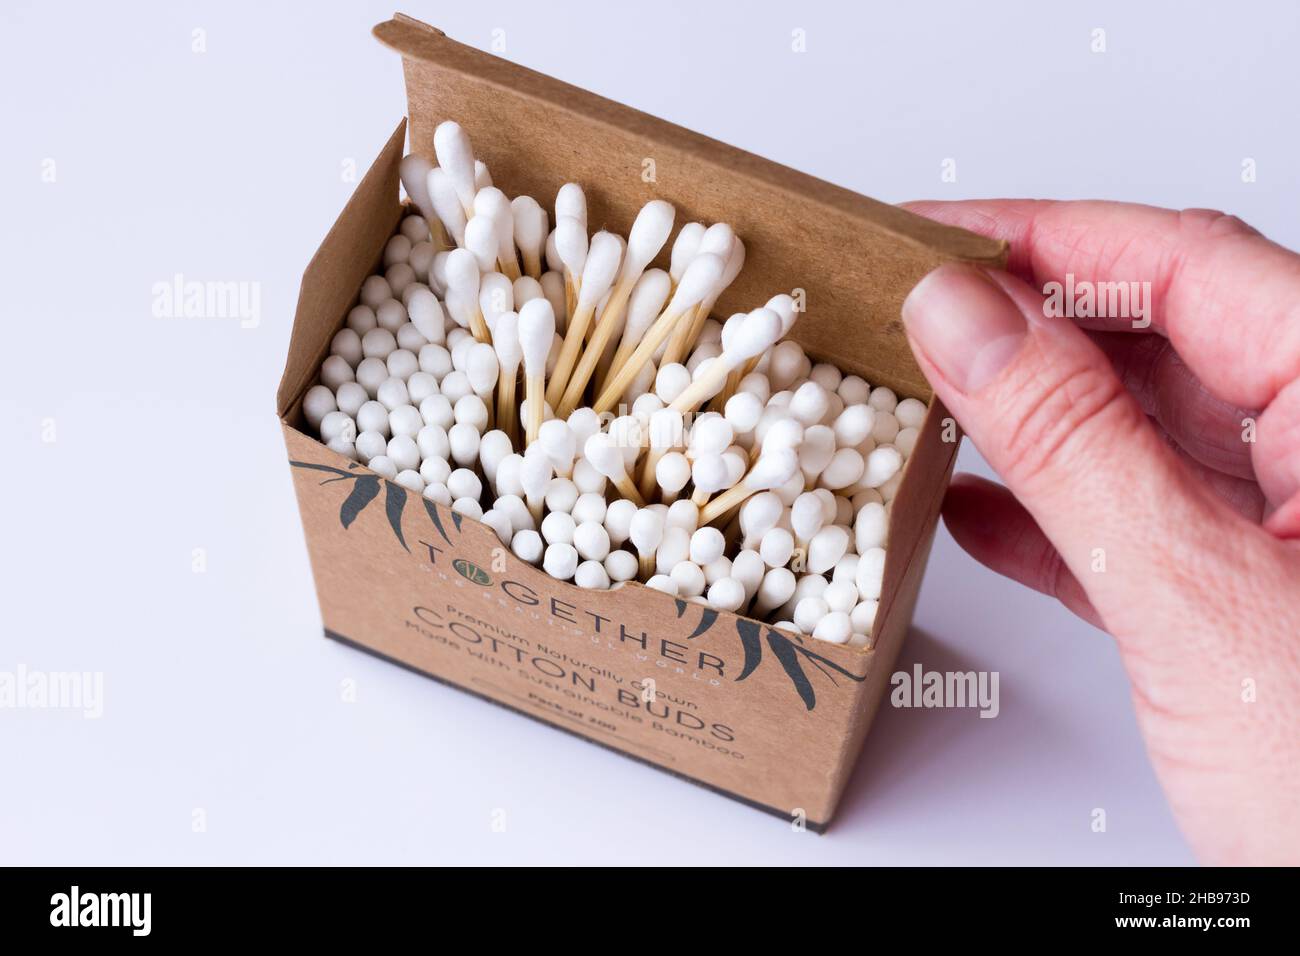 Opened box of eco friendly bamboo cotton buds swabs Stock Photo